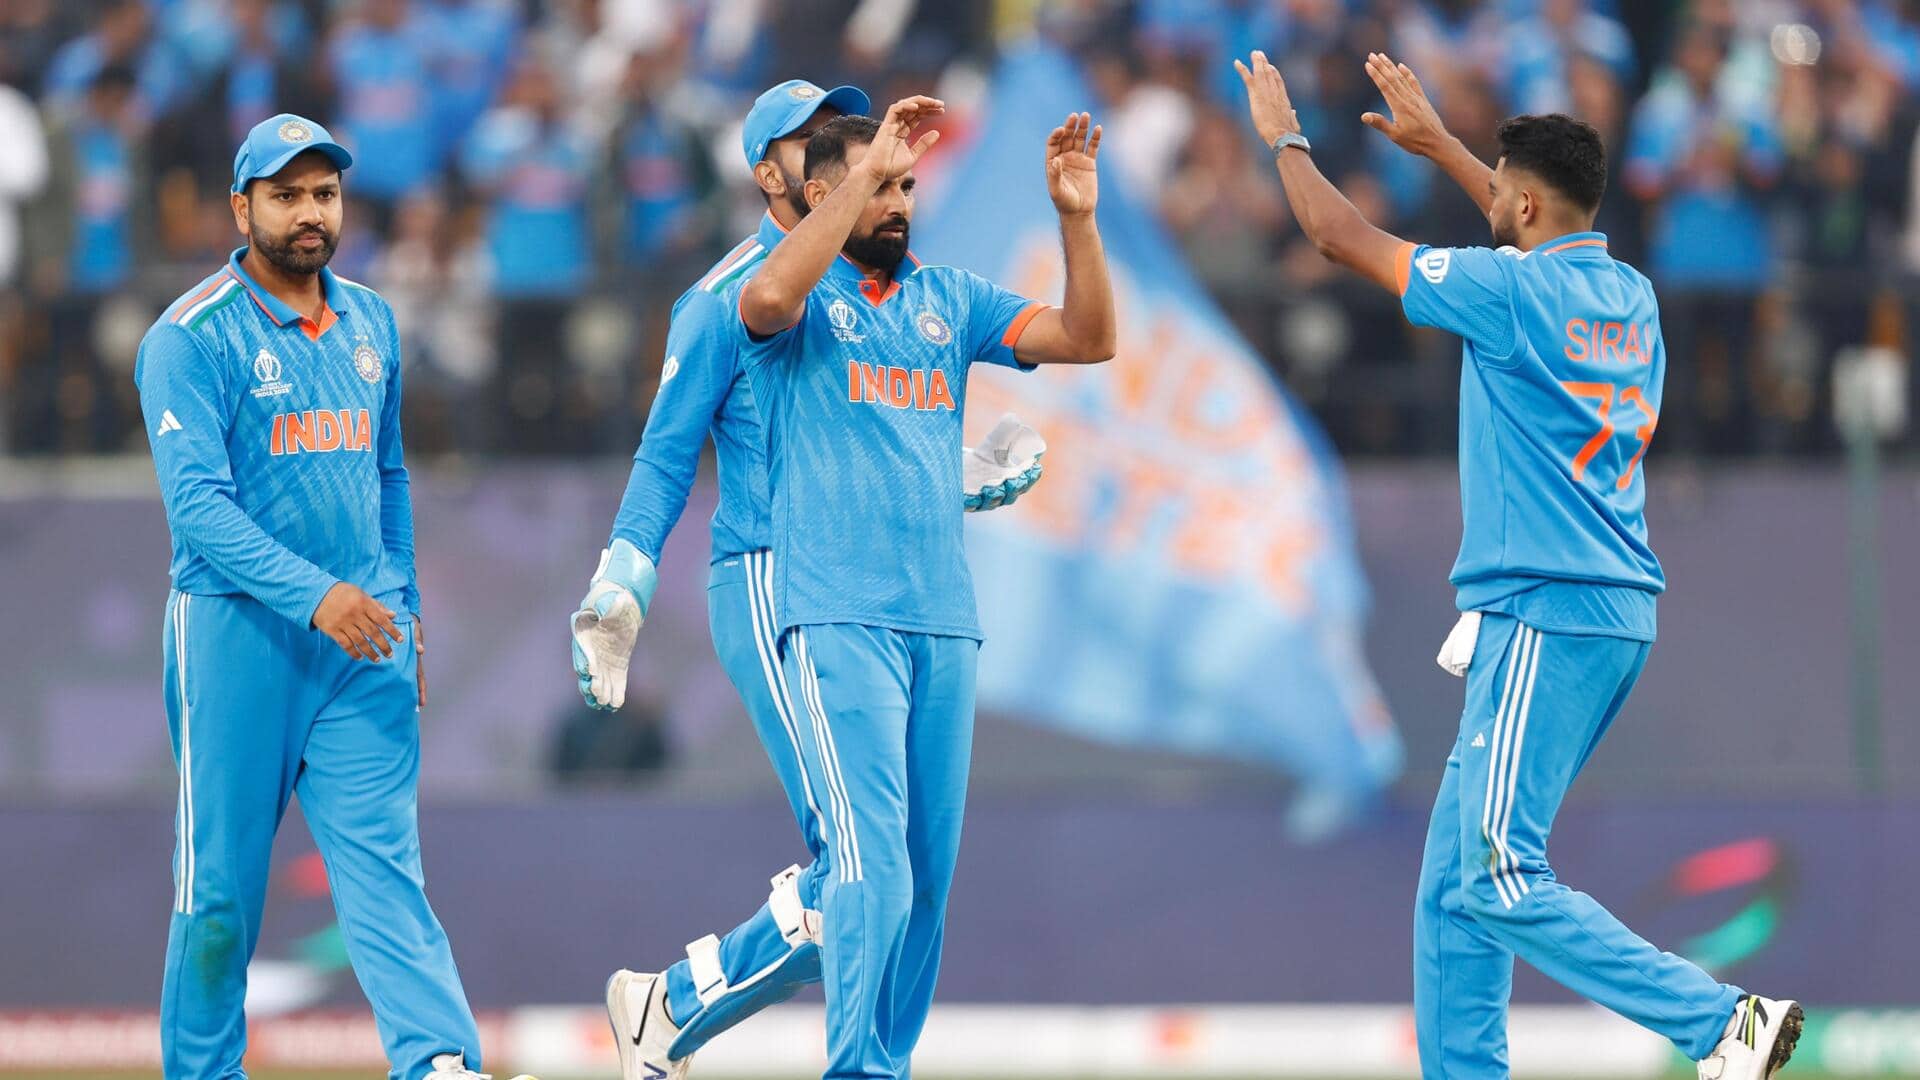 ICC Cricket World Cup, India vs England: Statistical Preview